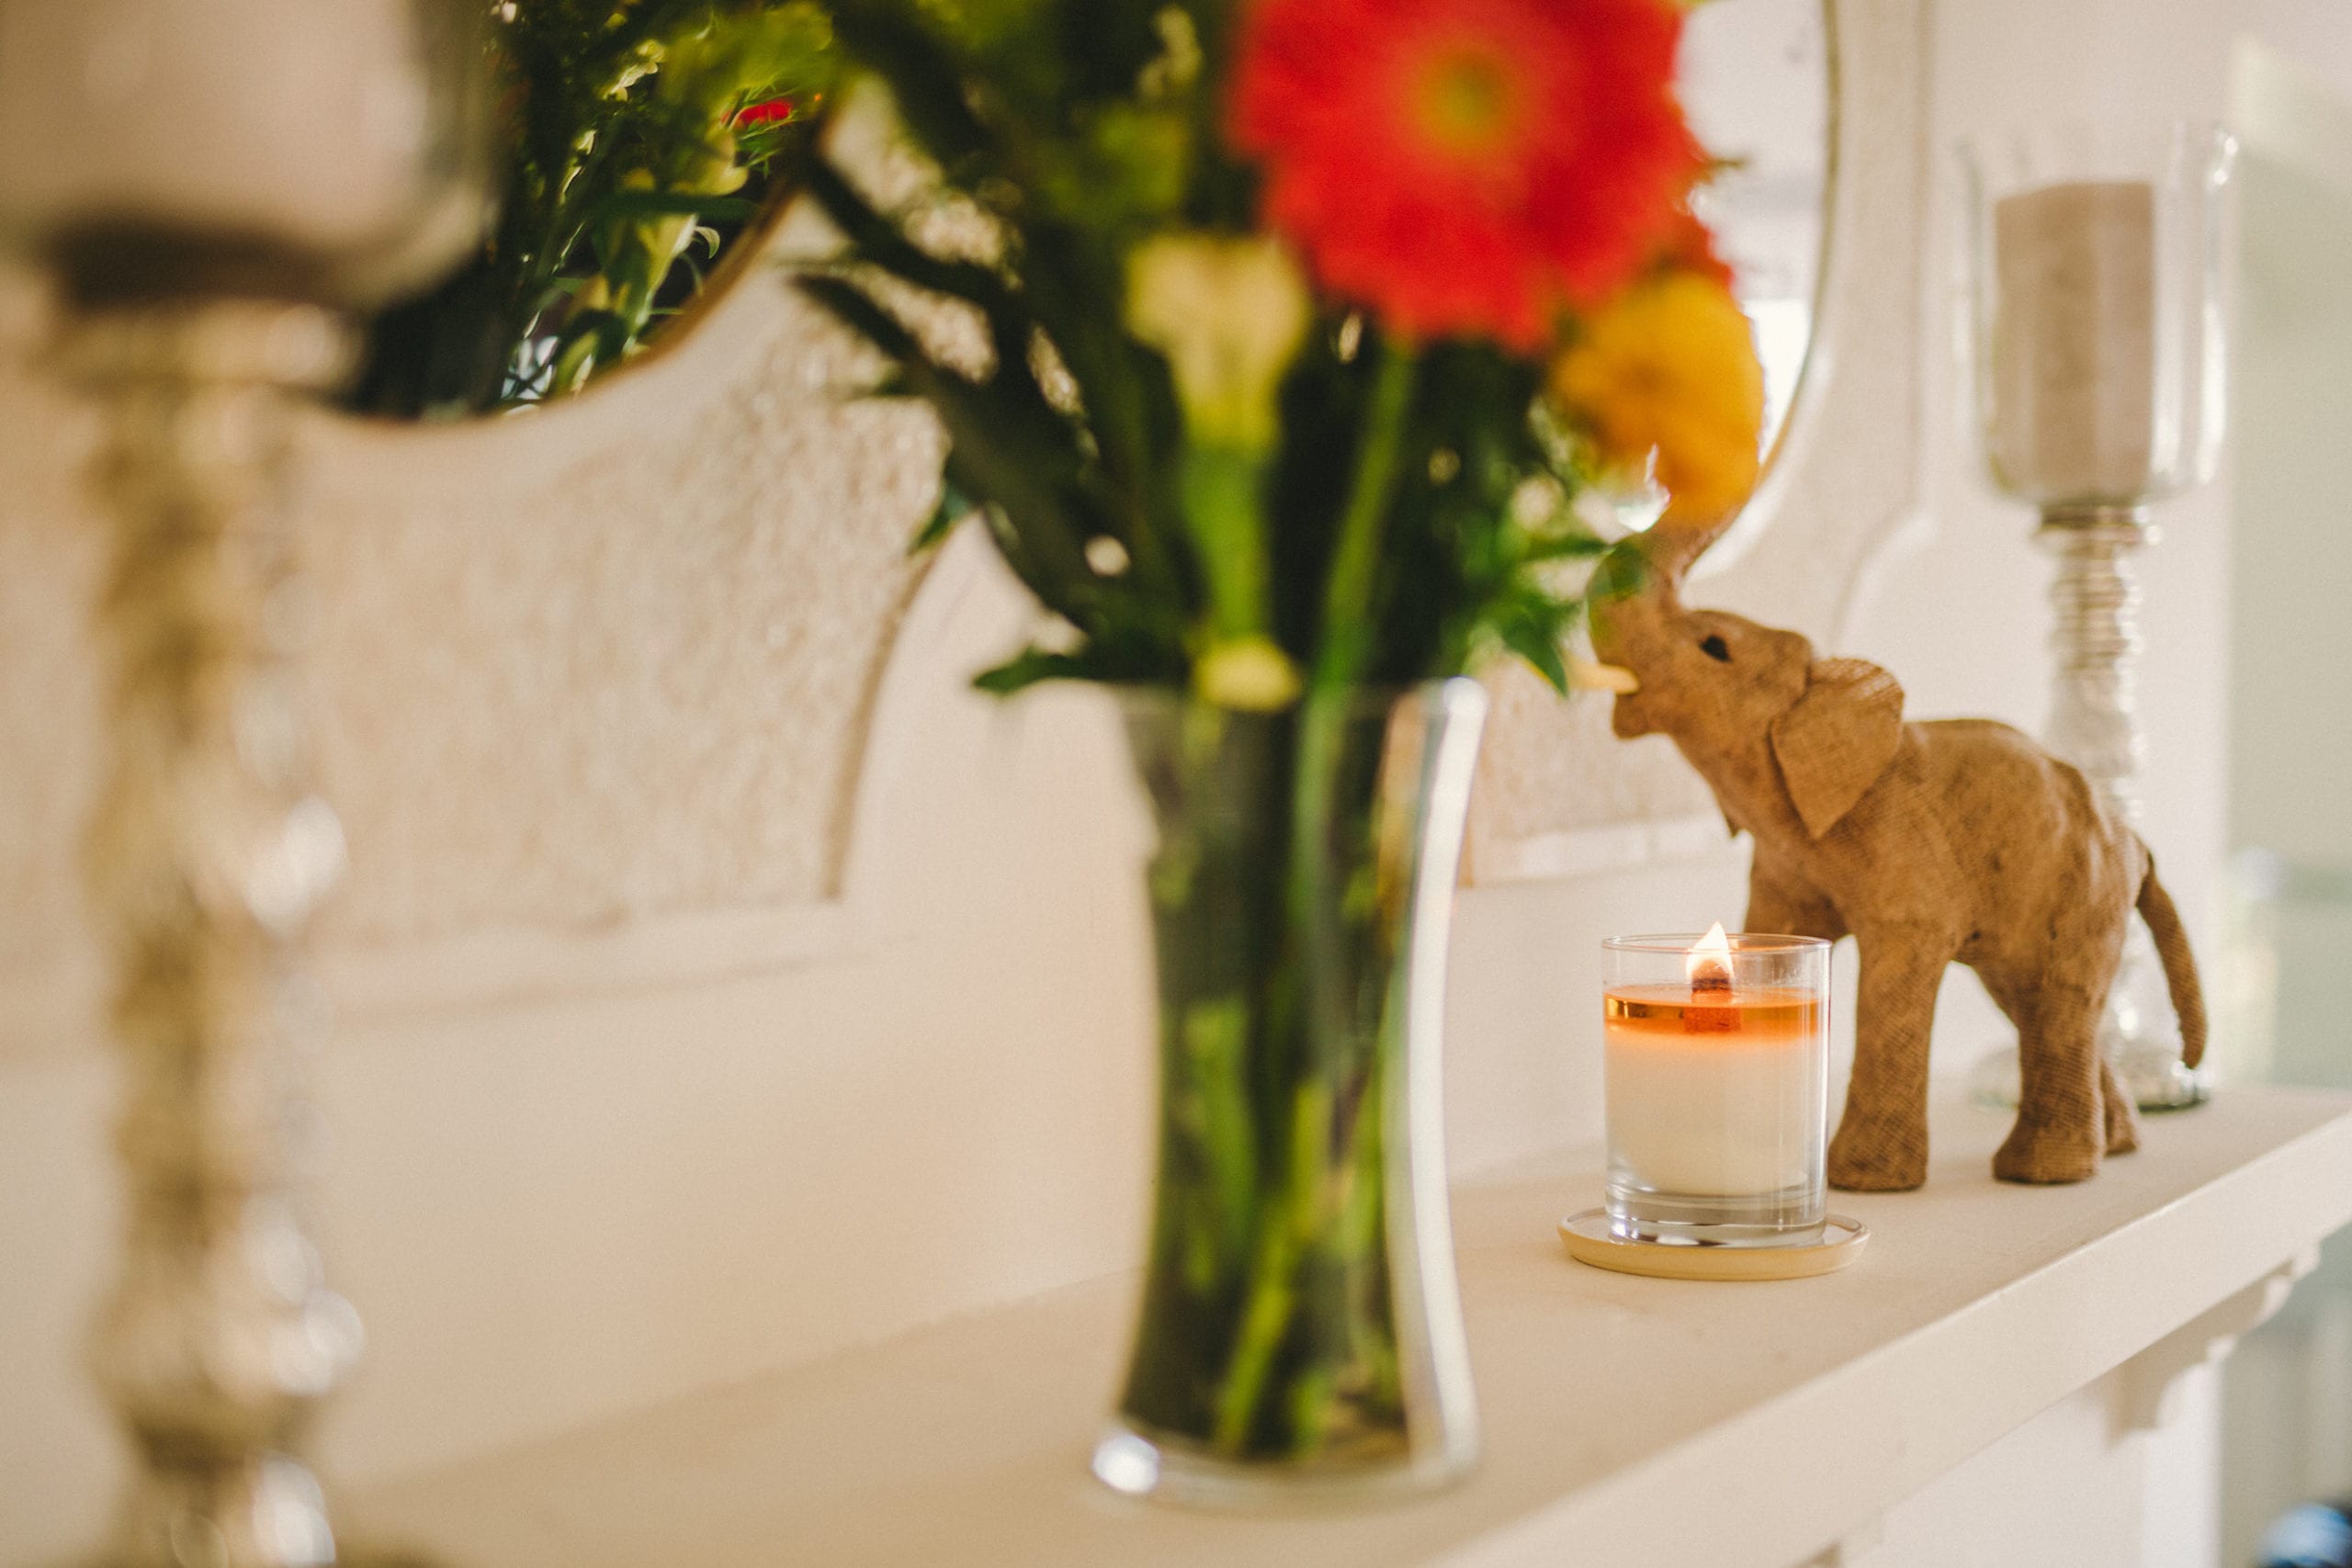 JSM Candle with orange liquid on shelf in between elephant art in the background and vase of flowers in the foreground